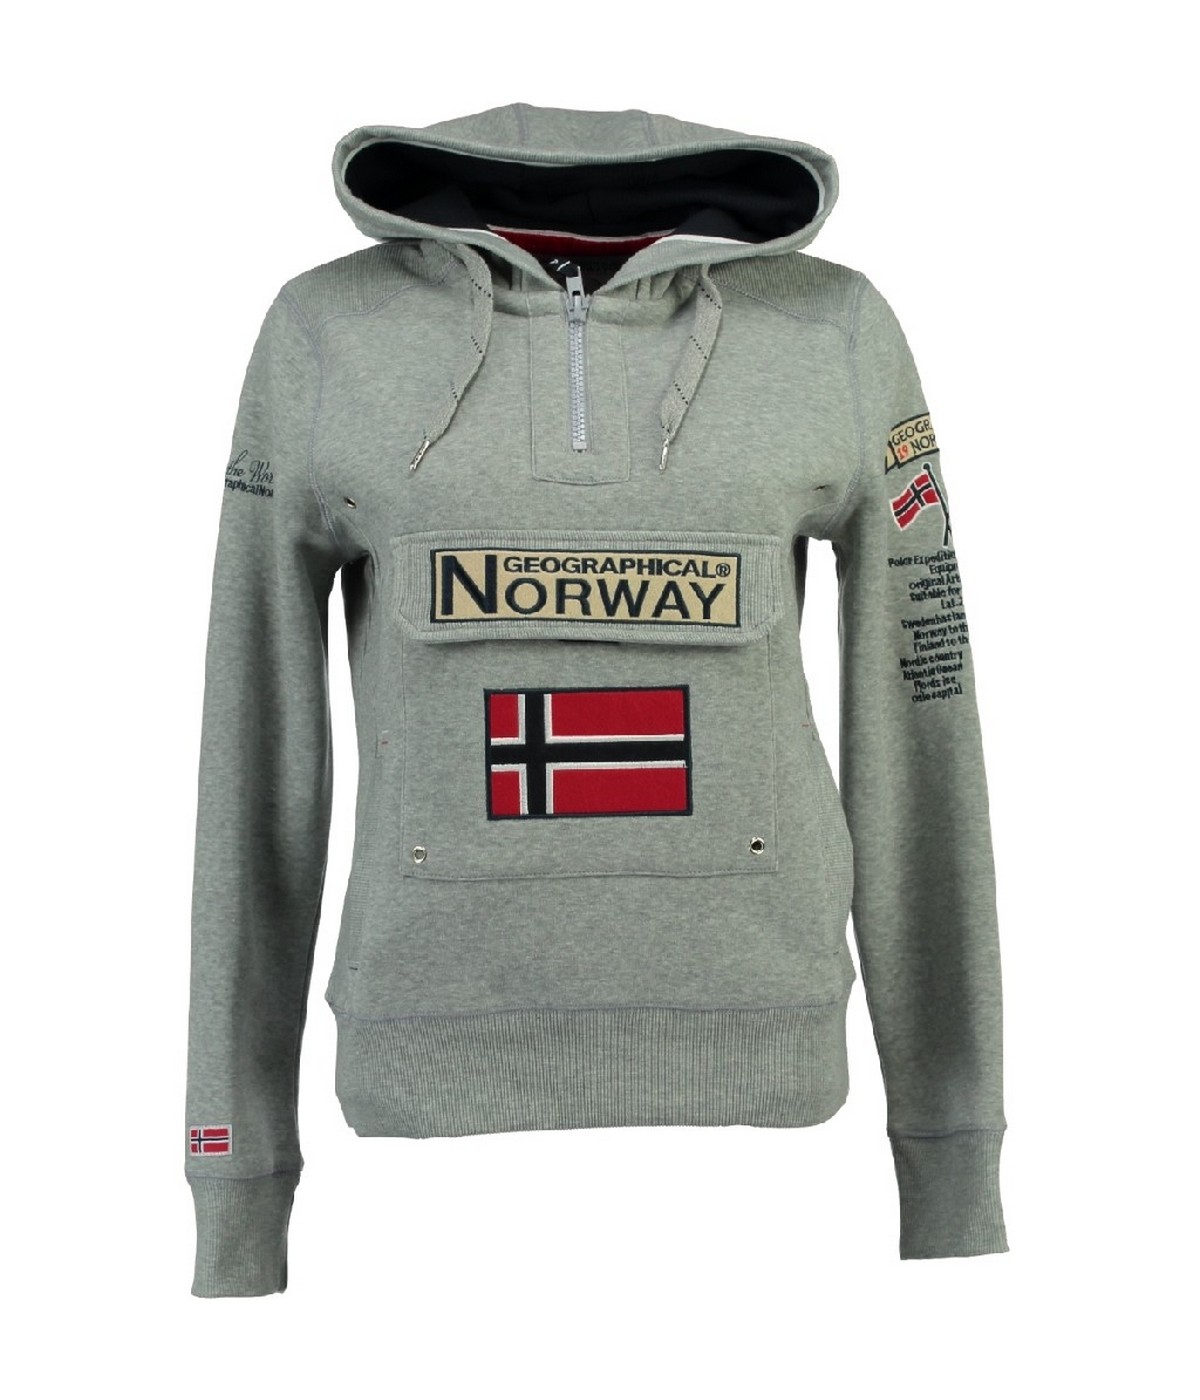 Sweat Fille Geographical Norway Gymclass New A100 Gris Clair